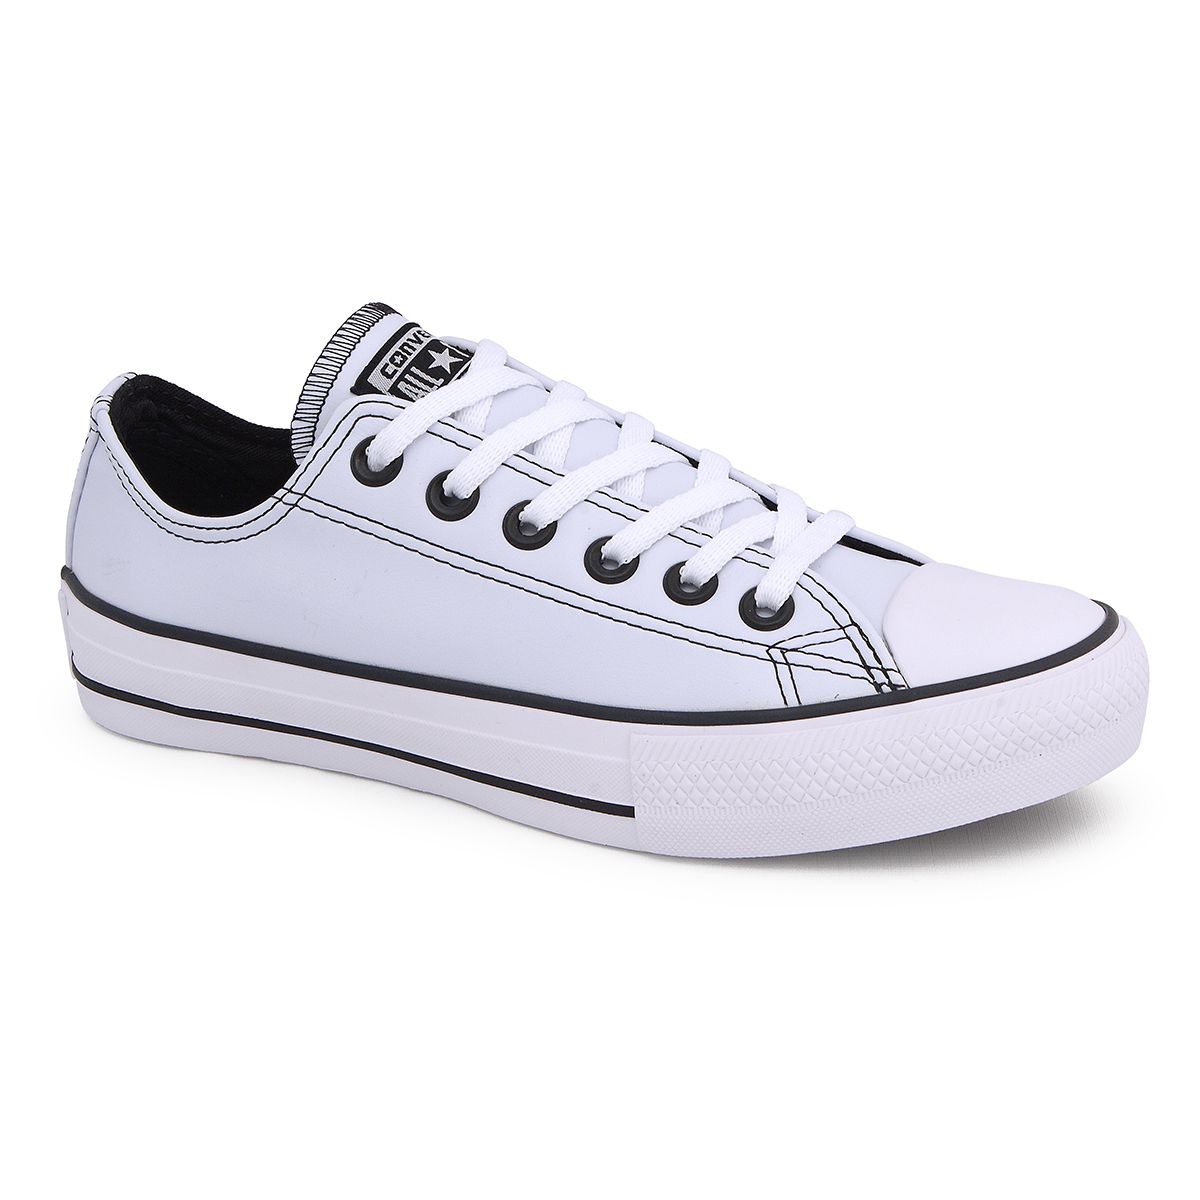 Tênis Converse Chuck Taylor All Star Couro - Branco - M.Shoes Imports